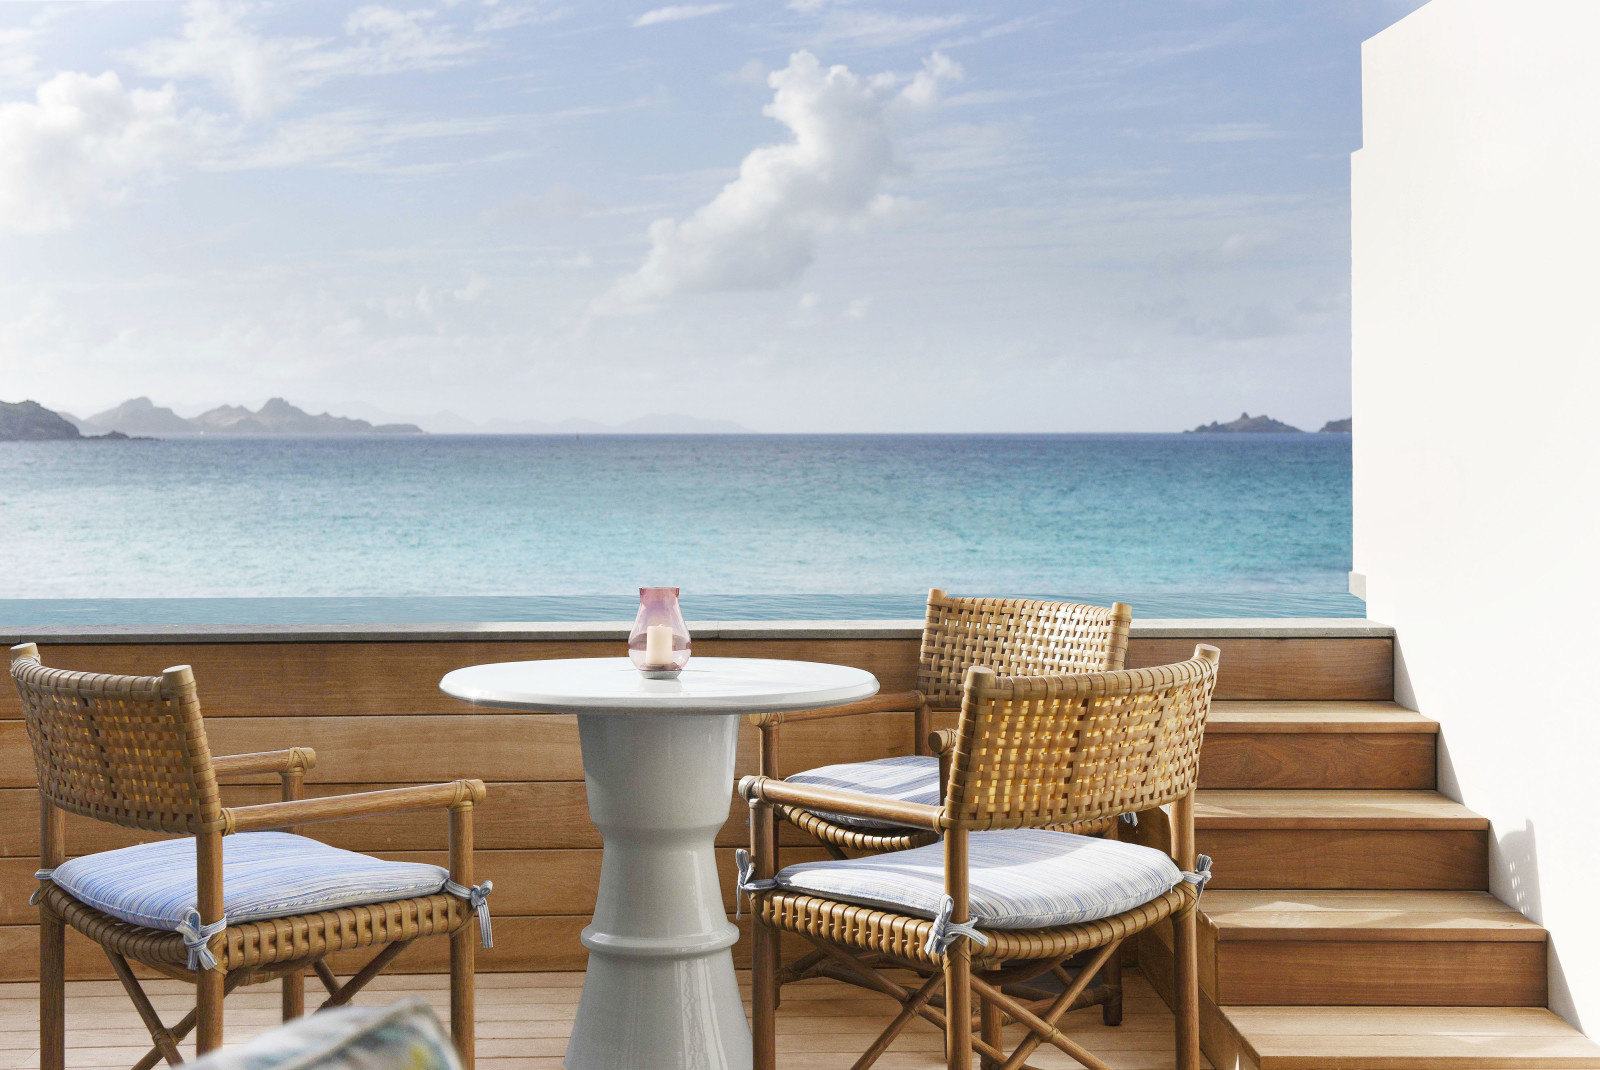 chairs and table overlooking ocean during daytime